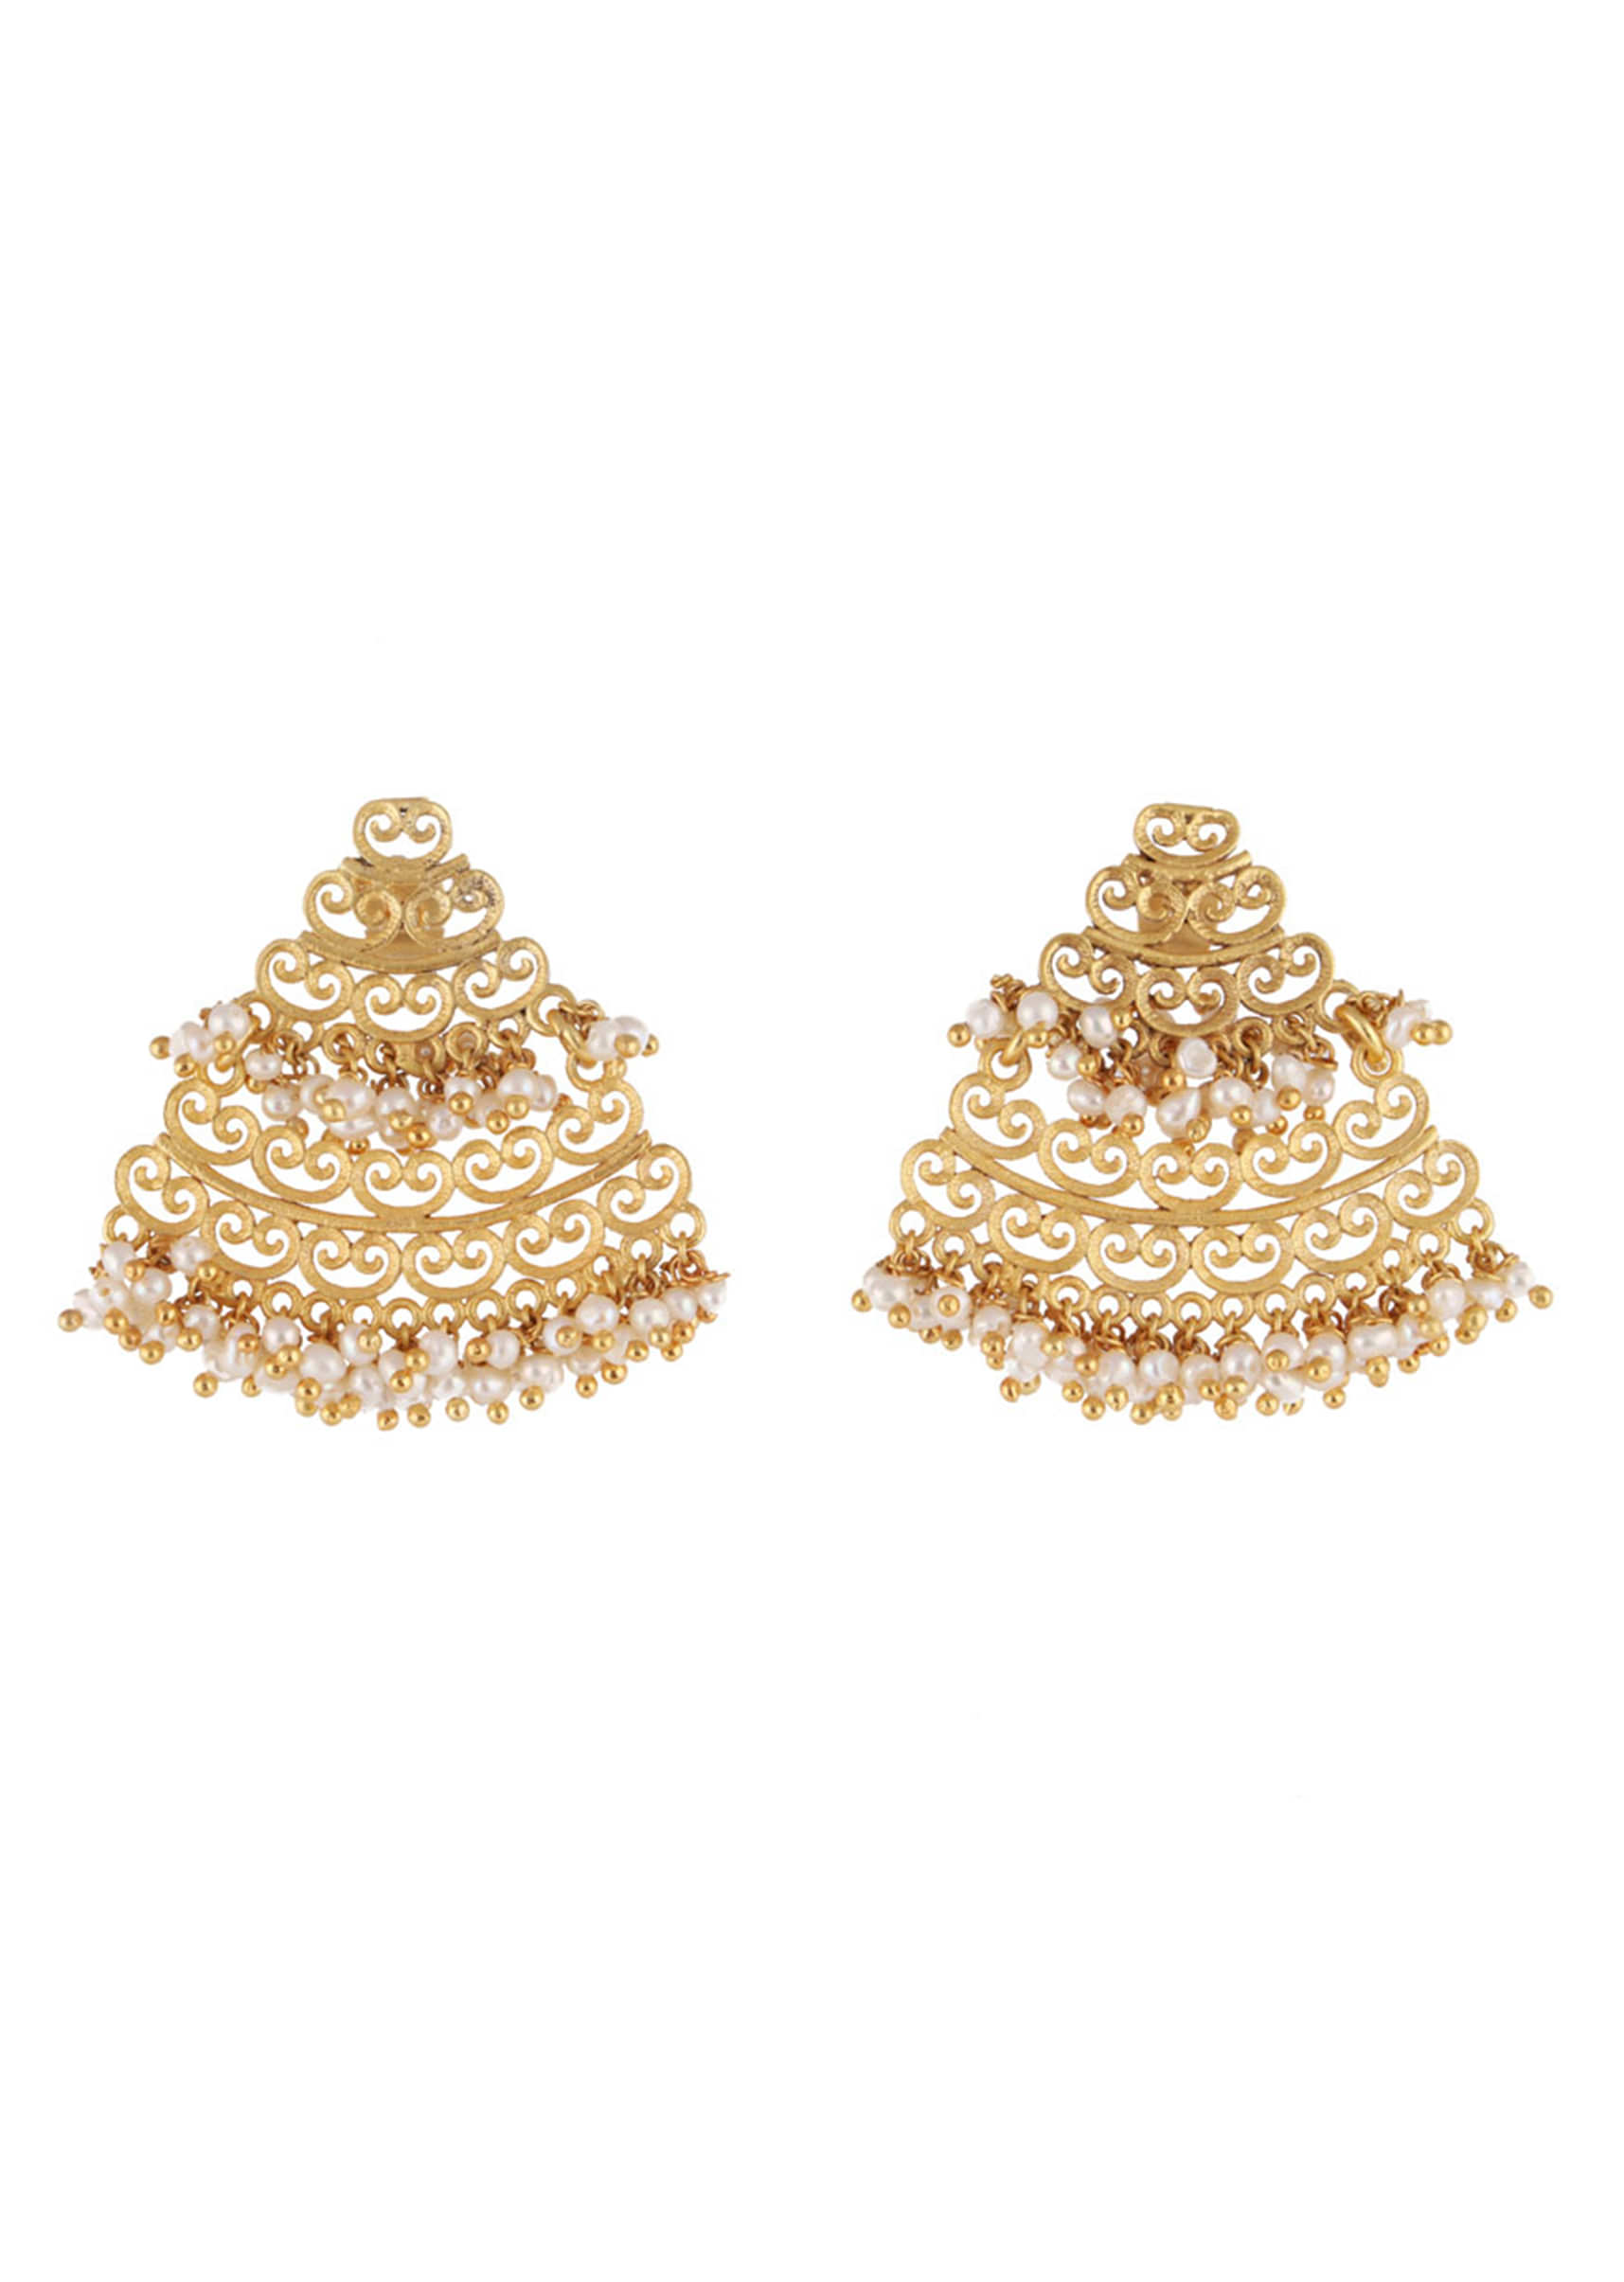 Gold Plated Earrings With Filigree Design And Two Layers Of Pearls By Zariin